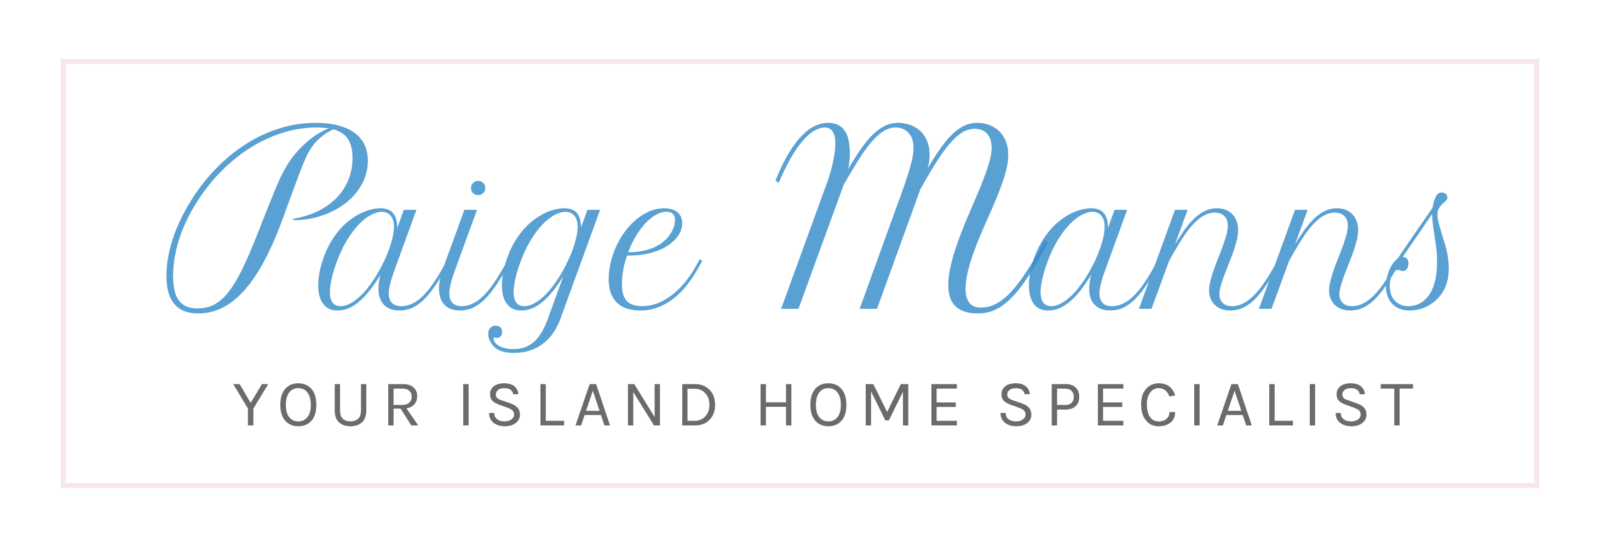 Paige Manns - Your Island Home Specialist